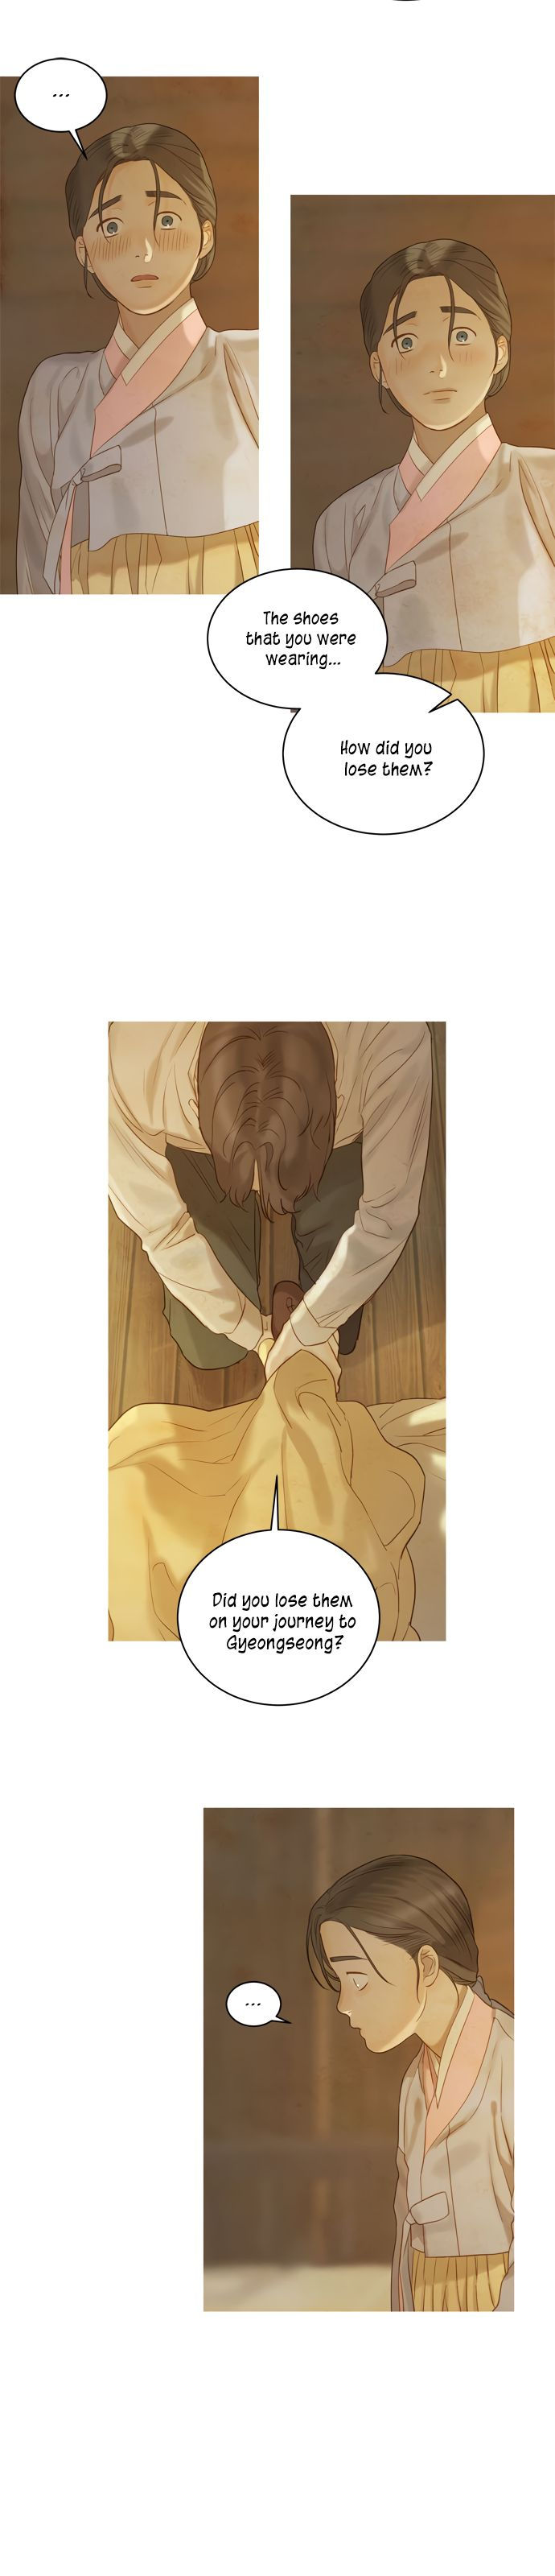 Gorae Byul - The Gyeongseong Mermaid - Chapter 23 Page 12